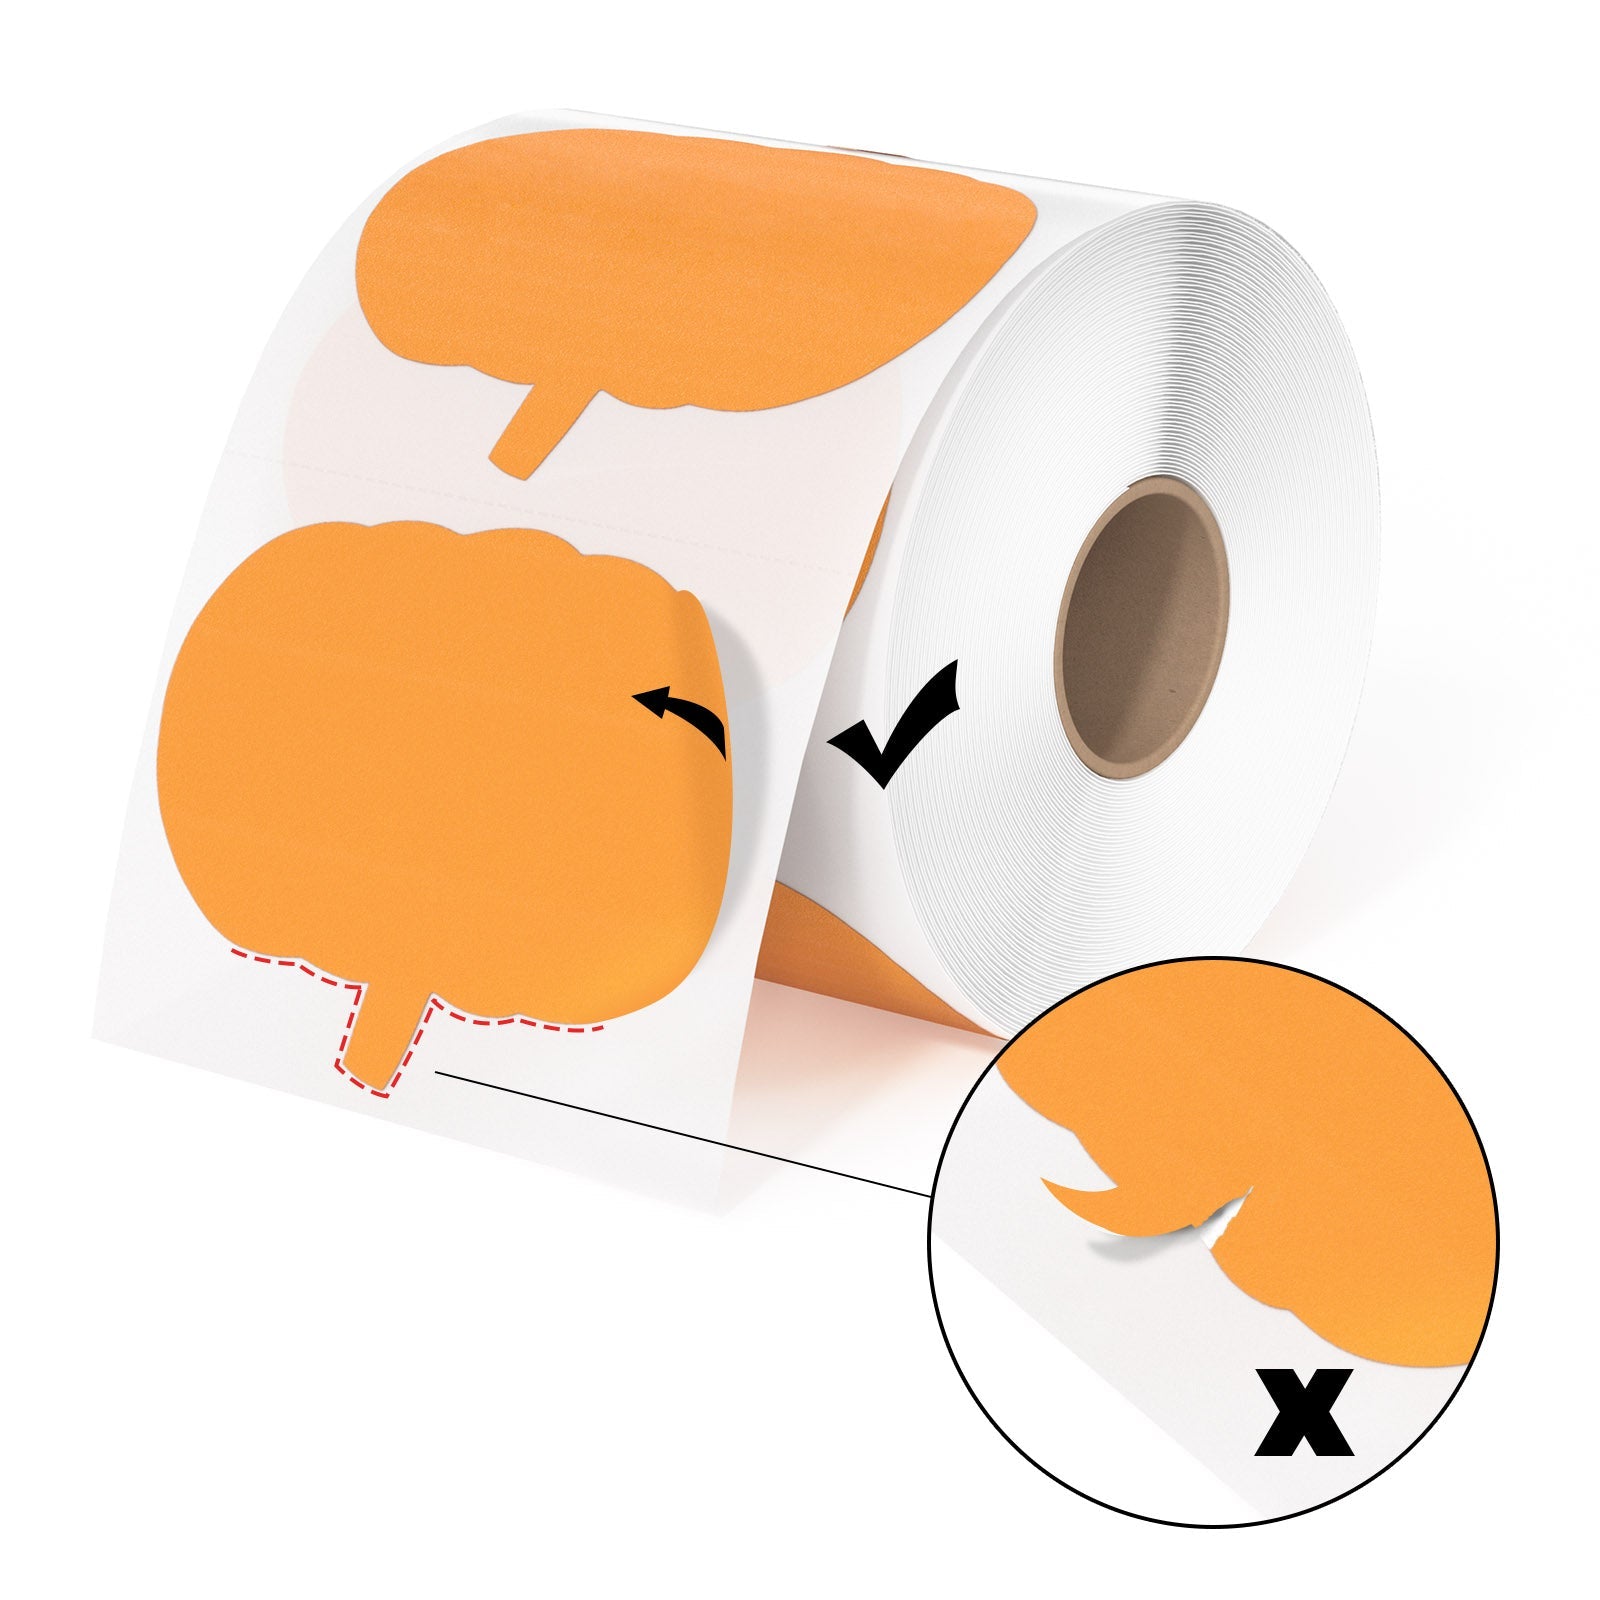 These pumpkin labels are easy to apply, with a self-adhesive backing that ensures a secure hold.